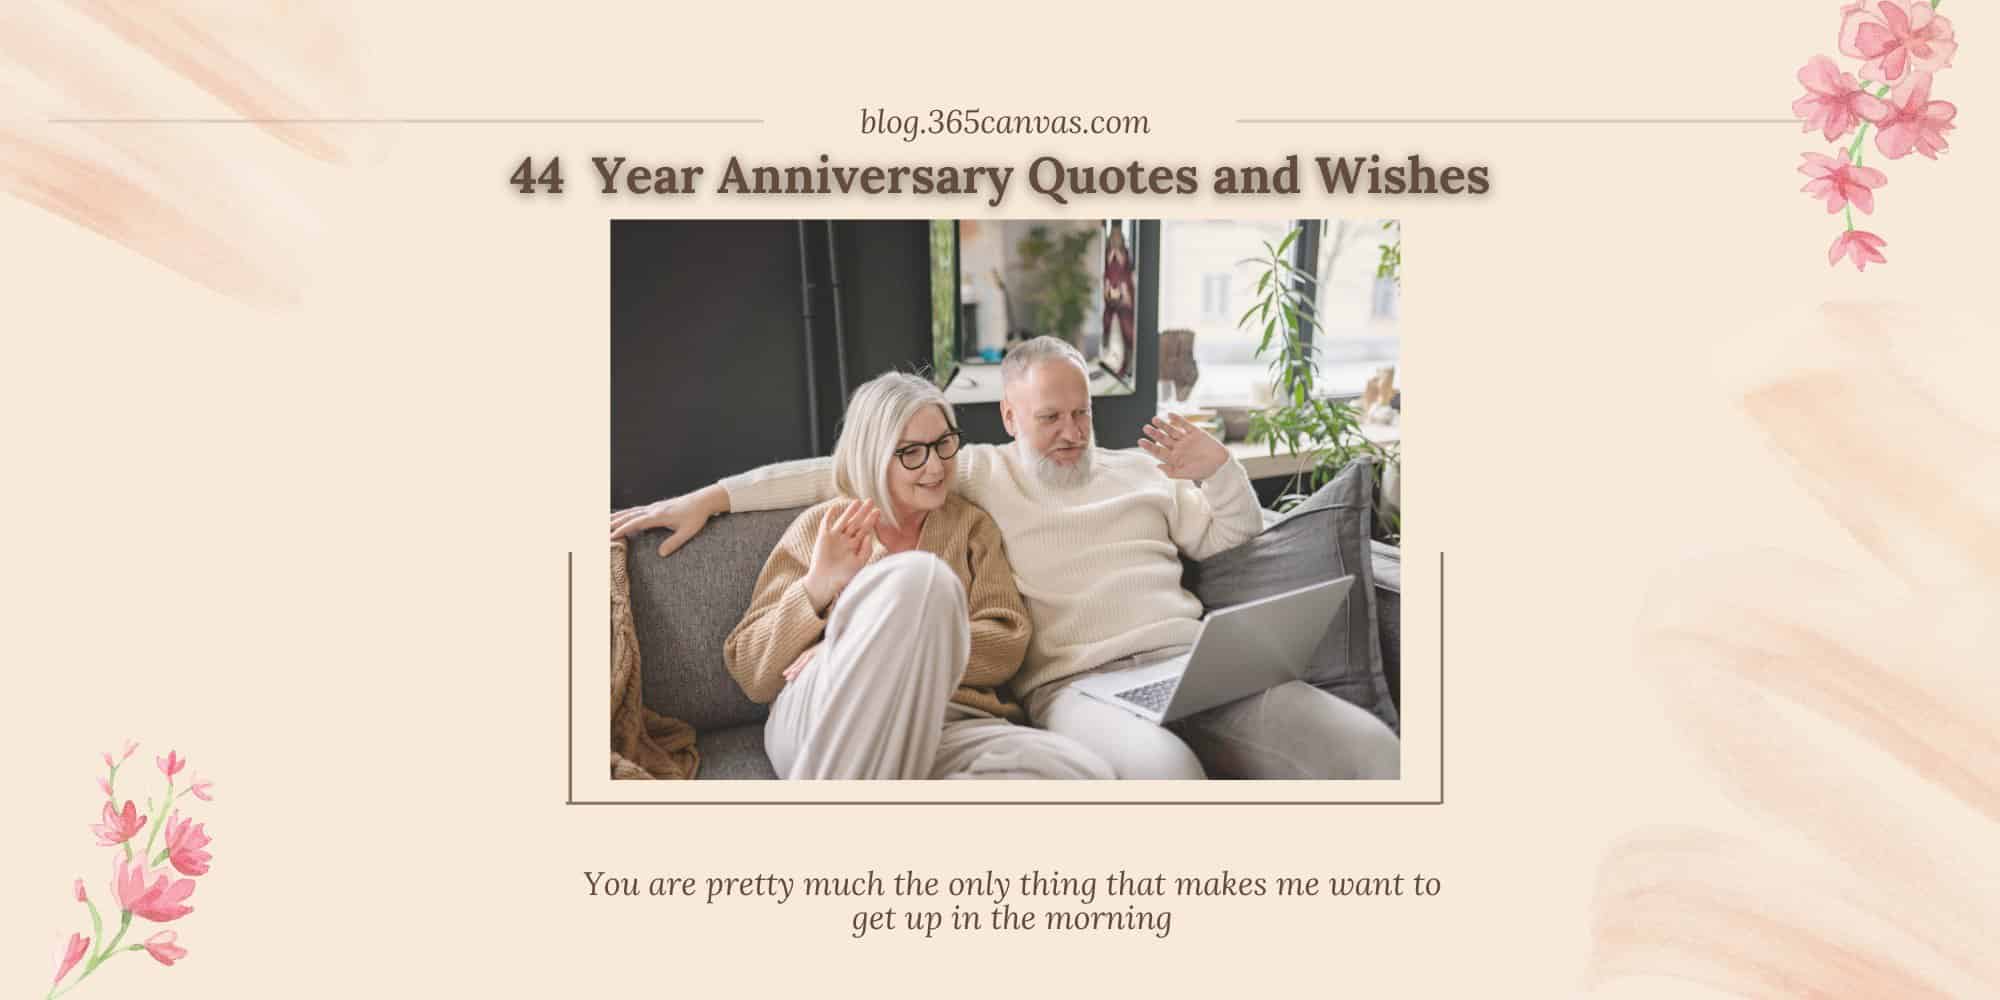 30+ Happy 44th Year Electronic Anniversary Quotes, Wishes and Messages